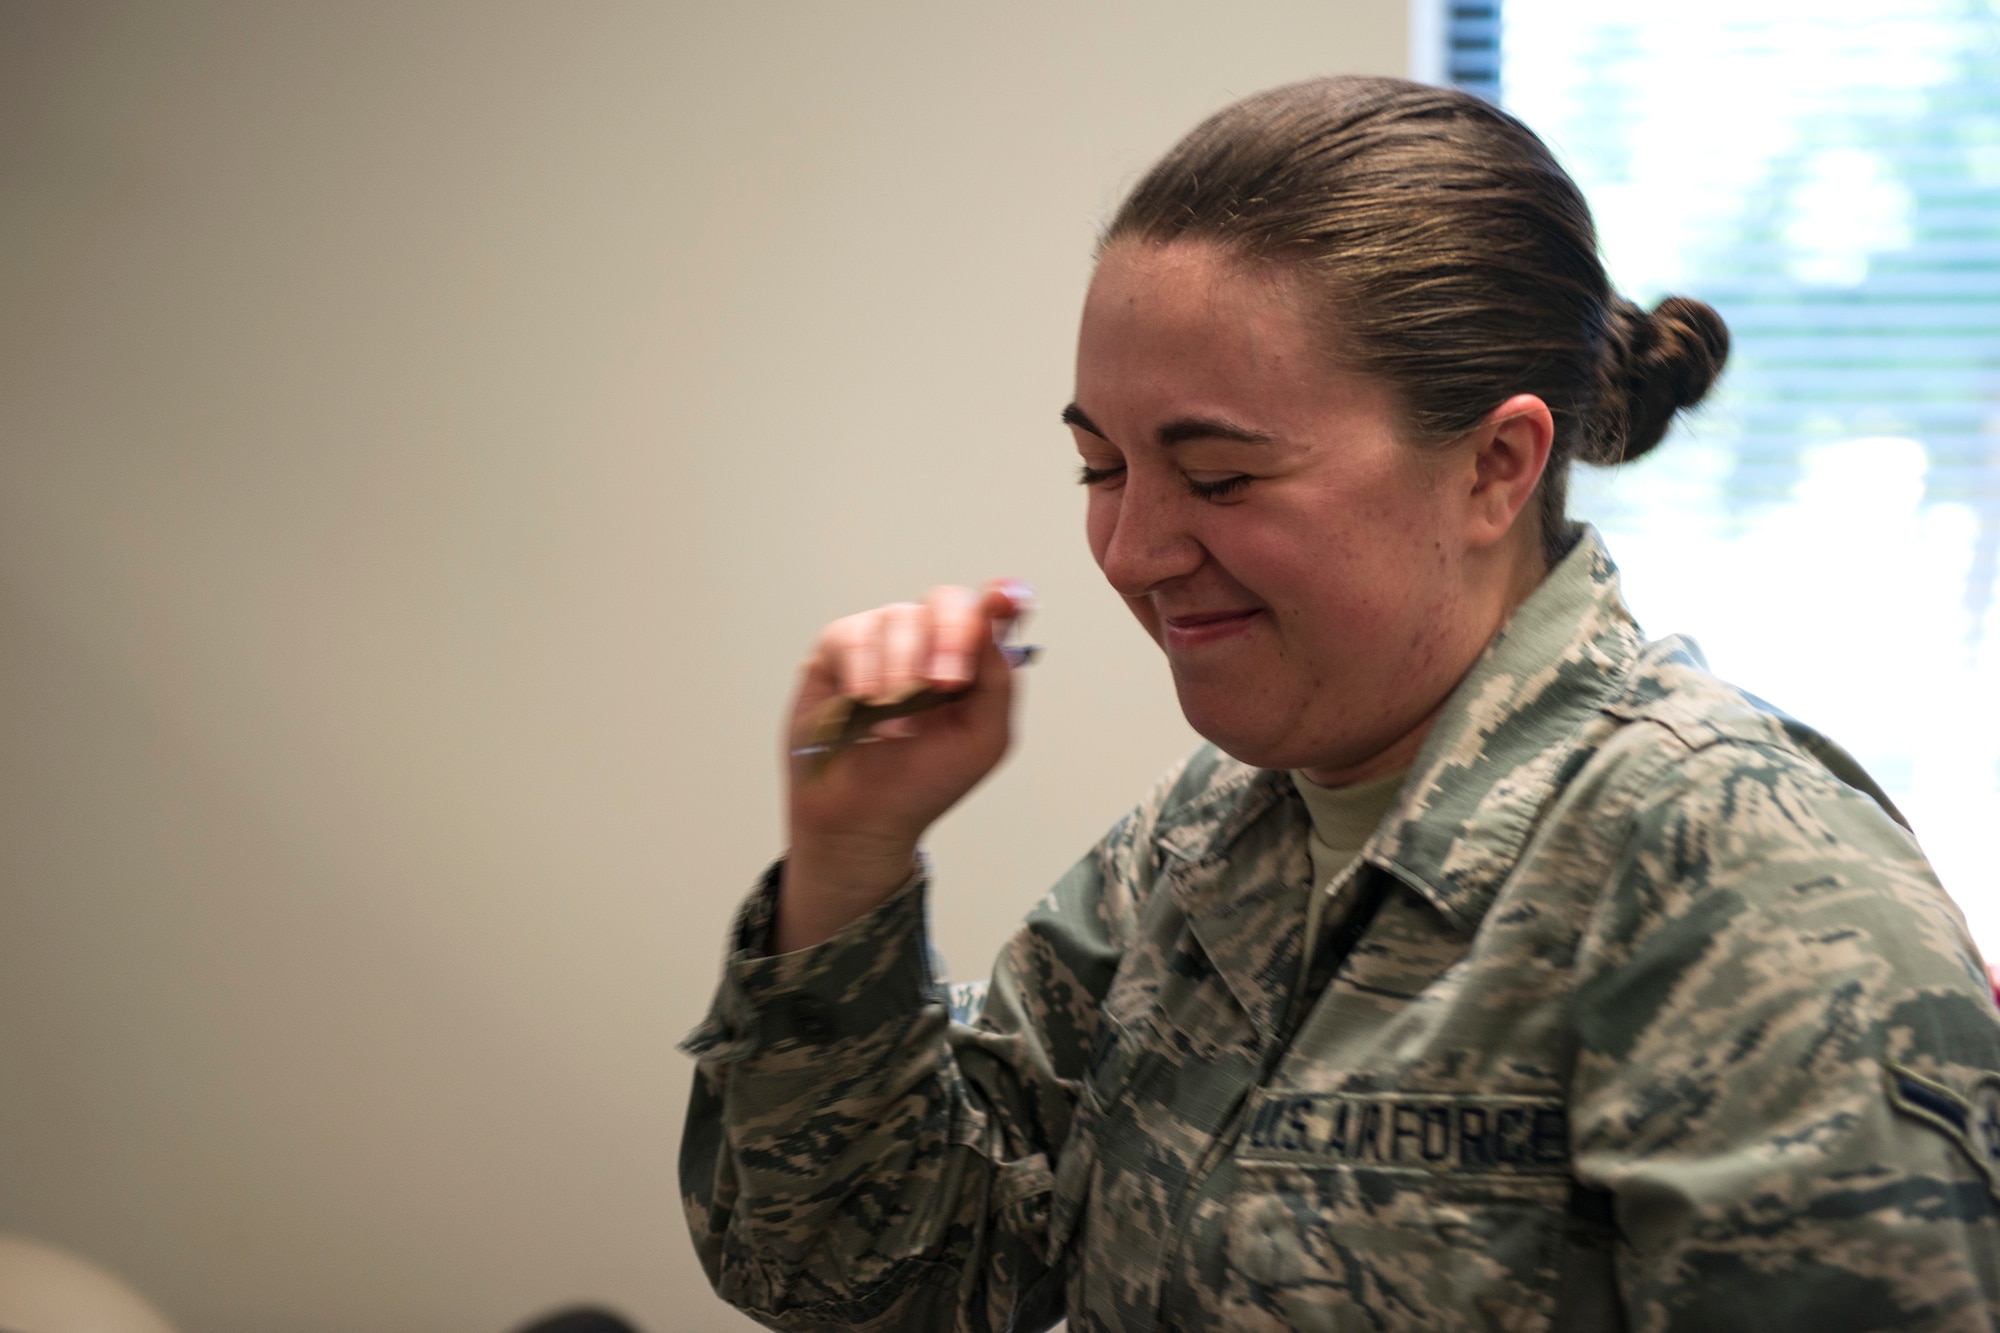 Airman McKenzie Daigle, 23d Aerospace Medicine Squadron public health technician, consumes a meal, ready to eat (MRE) during an MRE open-package inspection, April 6, 2018, at Moody Air Force Base, Ga. Airmen from Public Health examine the MREs for defects and overall quality and determine whether they’ll be utilized here, at other bases or to condemn the batch. Public Health monitors more than 8,400 MREs yearly to ensure they are safe and fit for consumption, so as to maintain a healthy fighting force. (U.S. Air Force photo by Airman 1st Class Erick Requadt)